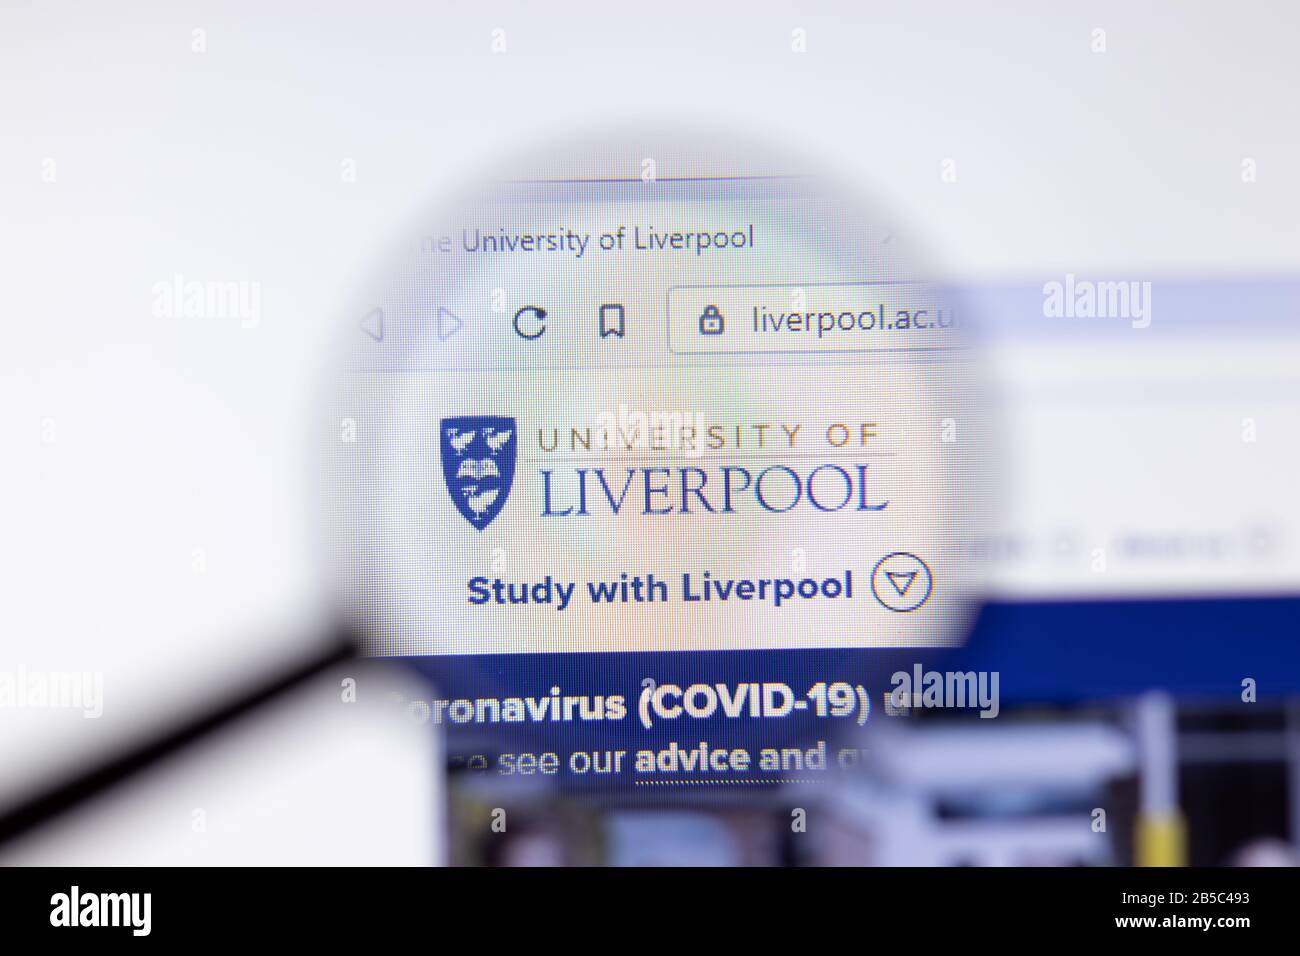 Los Angeles, California, USA - 7 March 2020: University of Liverpool website homepage logo visible on display close-up, Illustrative Editorial Stock Photo